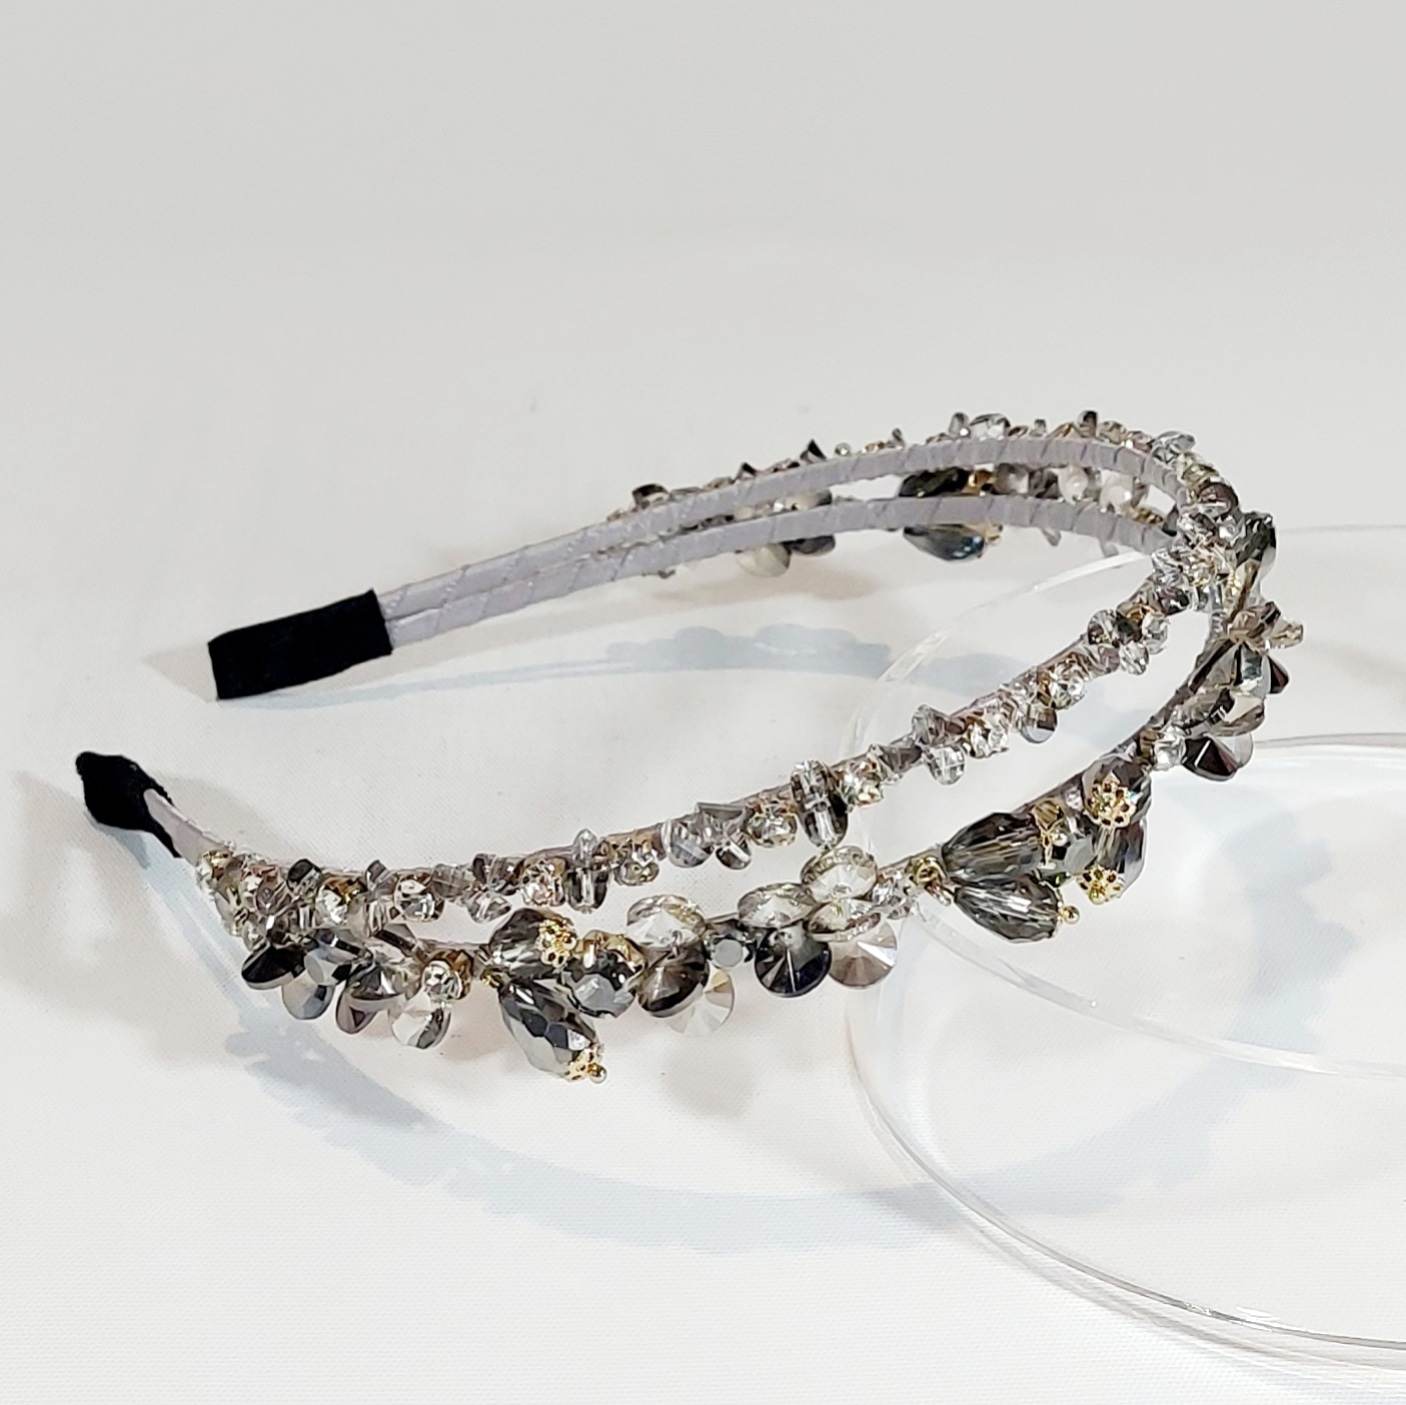 grey crystal headpiece for the races and weddings from the divalicious candyland collection